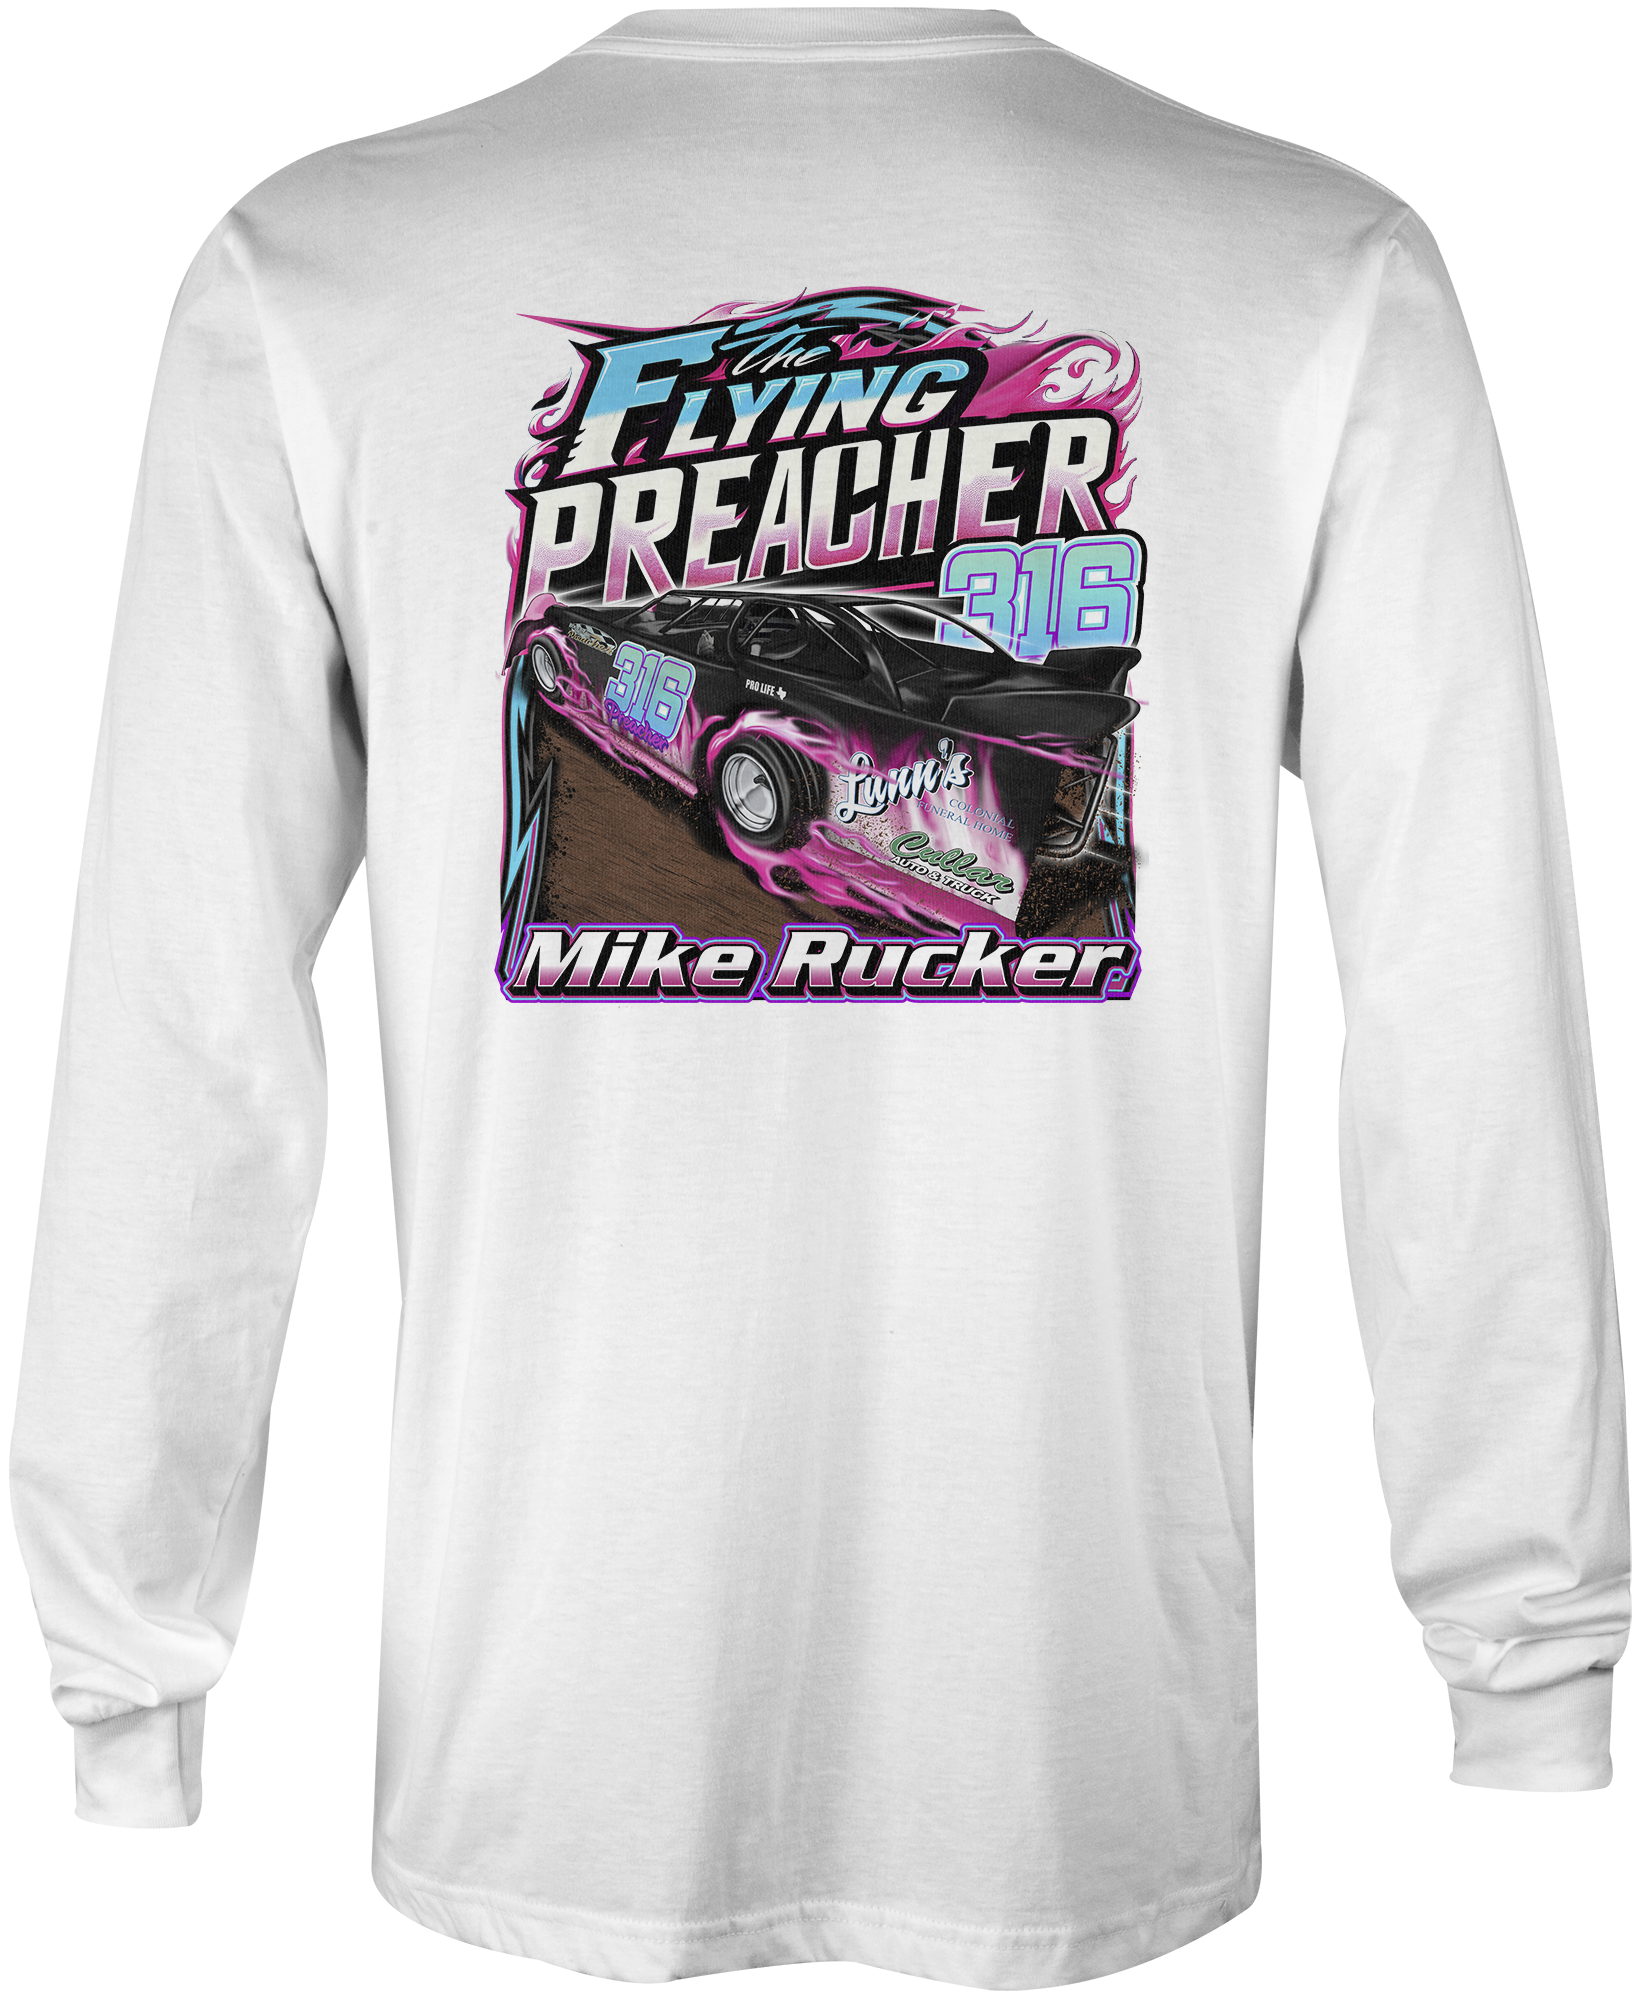 The Flying Preacher Long Sleeves